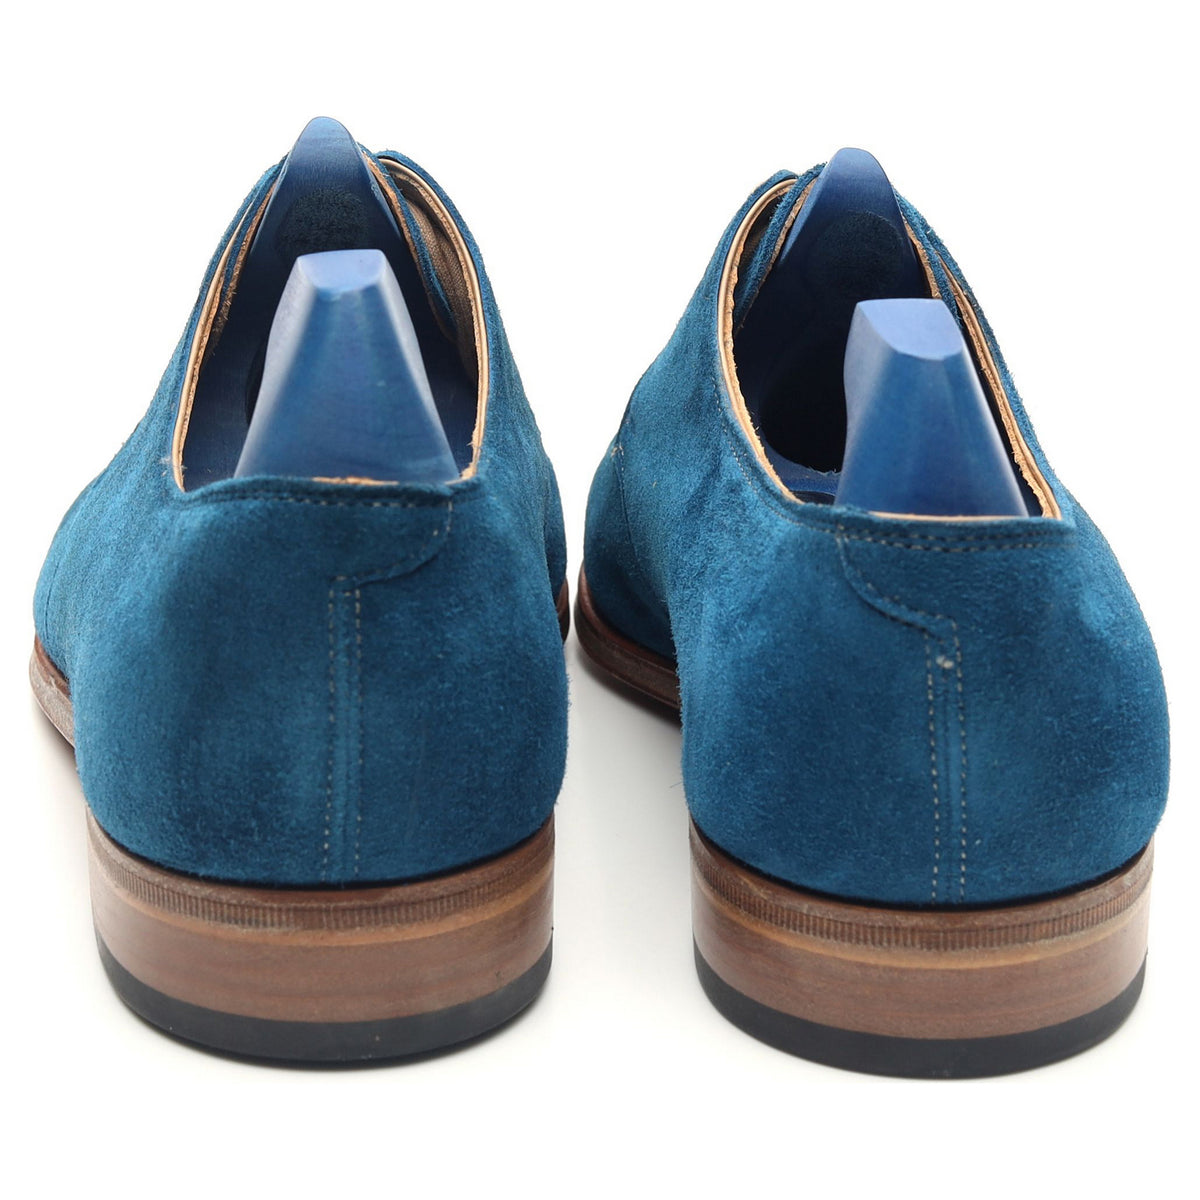 Paul Smith &#39;Willoughby&#39; Blue Suede Derby UK 5.5 EE